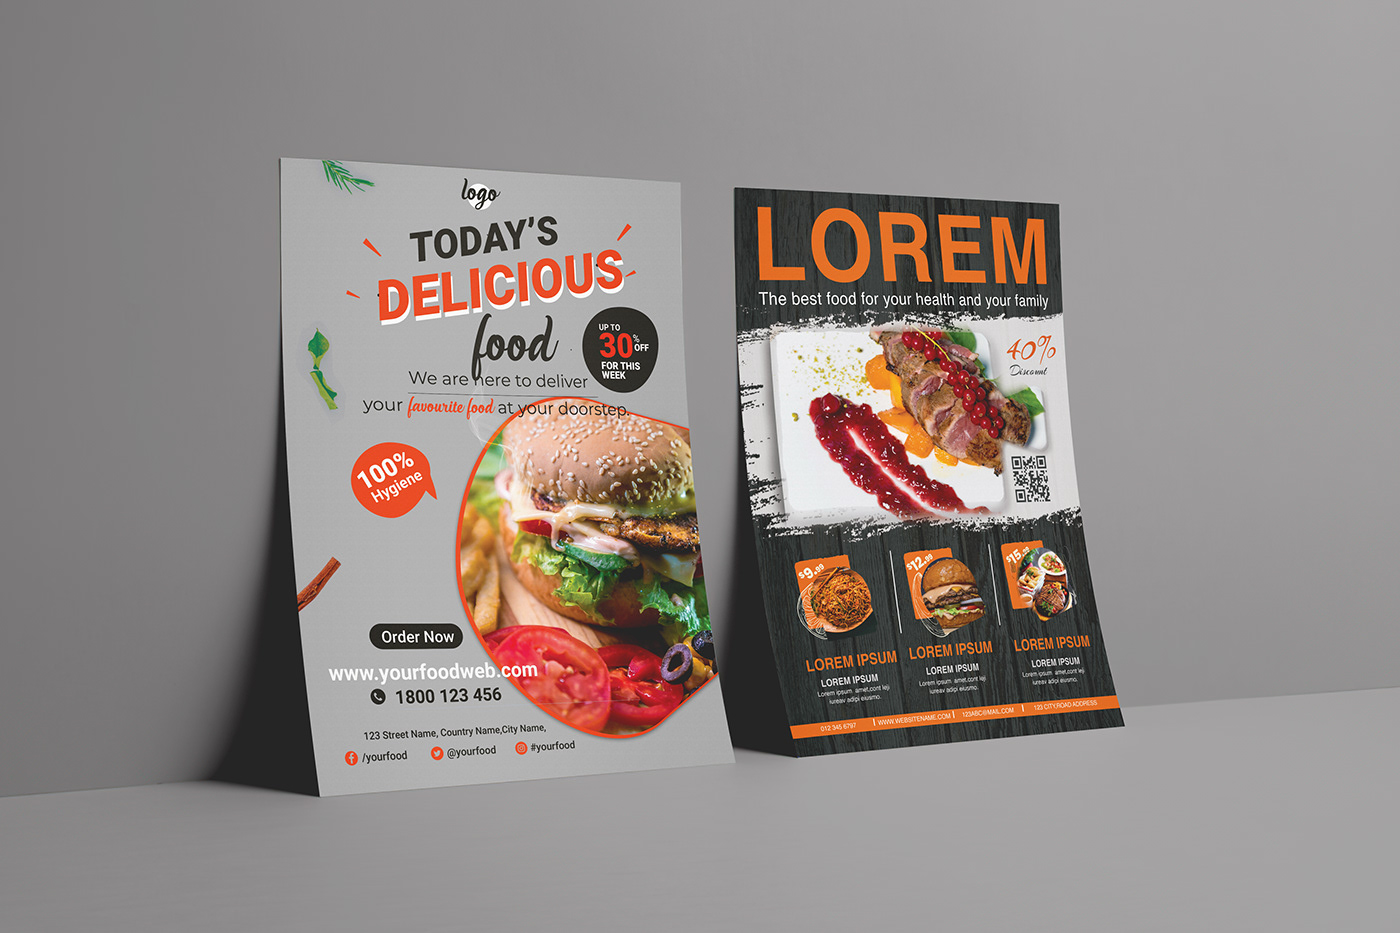 Flyers are usually printed on both sides and contain information 
about a product or event. They are